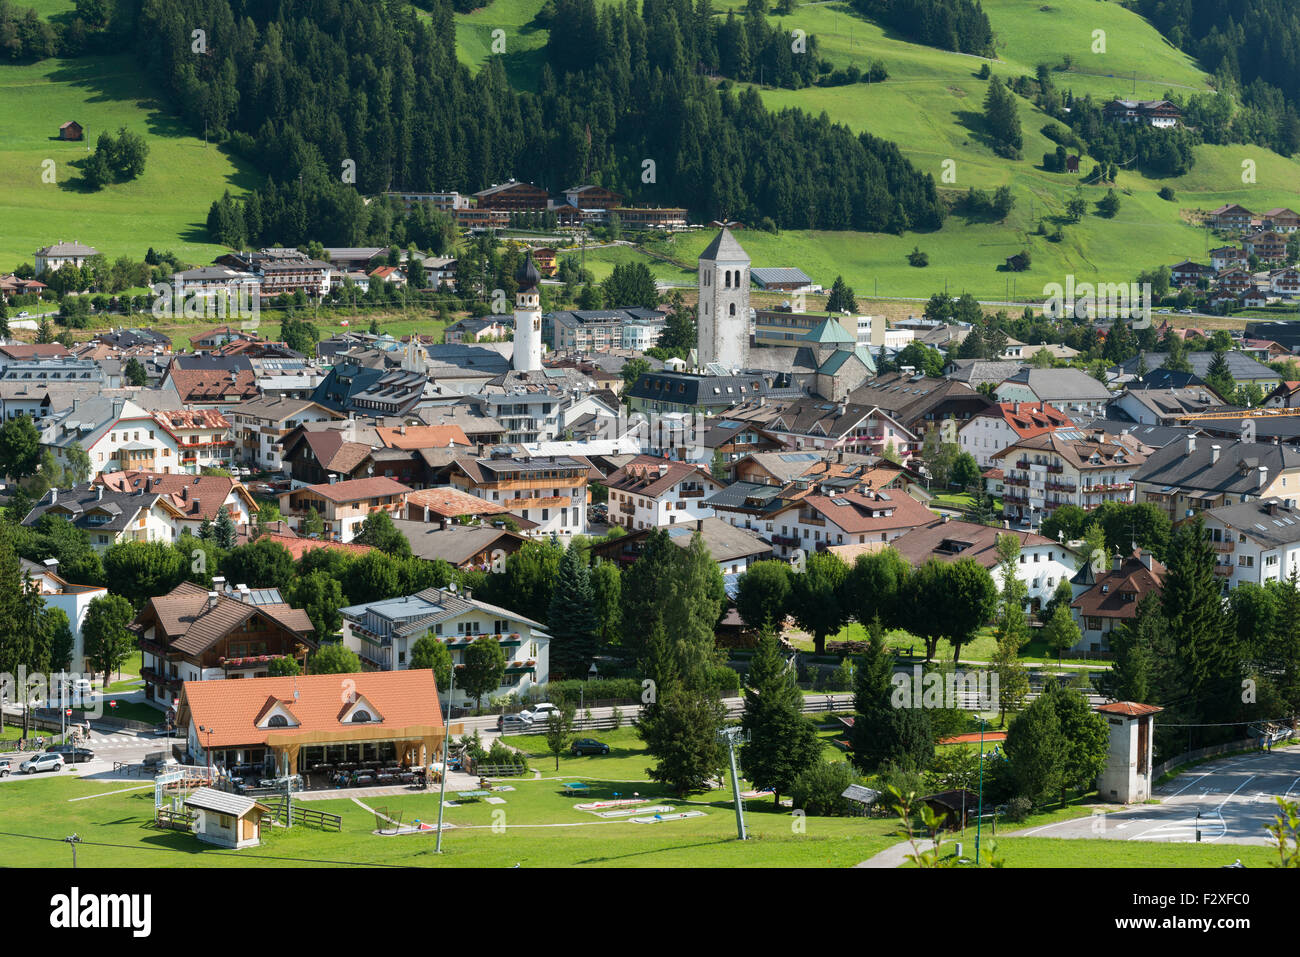 Innchen or San Candido, Dolomites, Trentino-Alto Adige, Province of South Tyrol, Italy Stock Photo